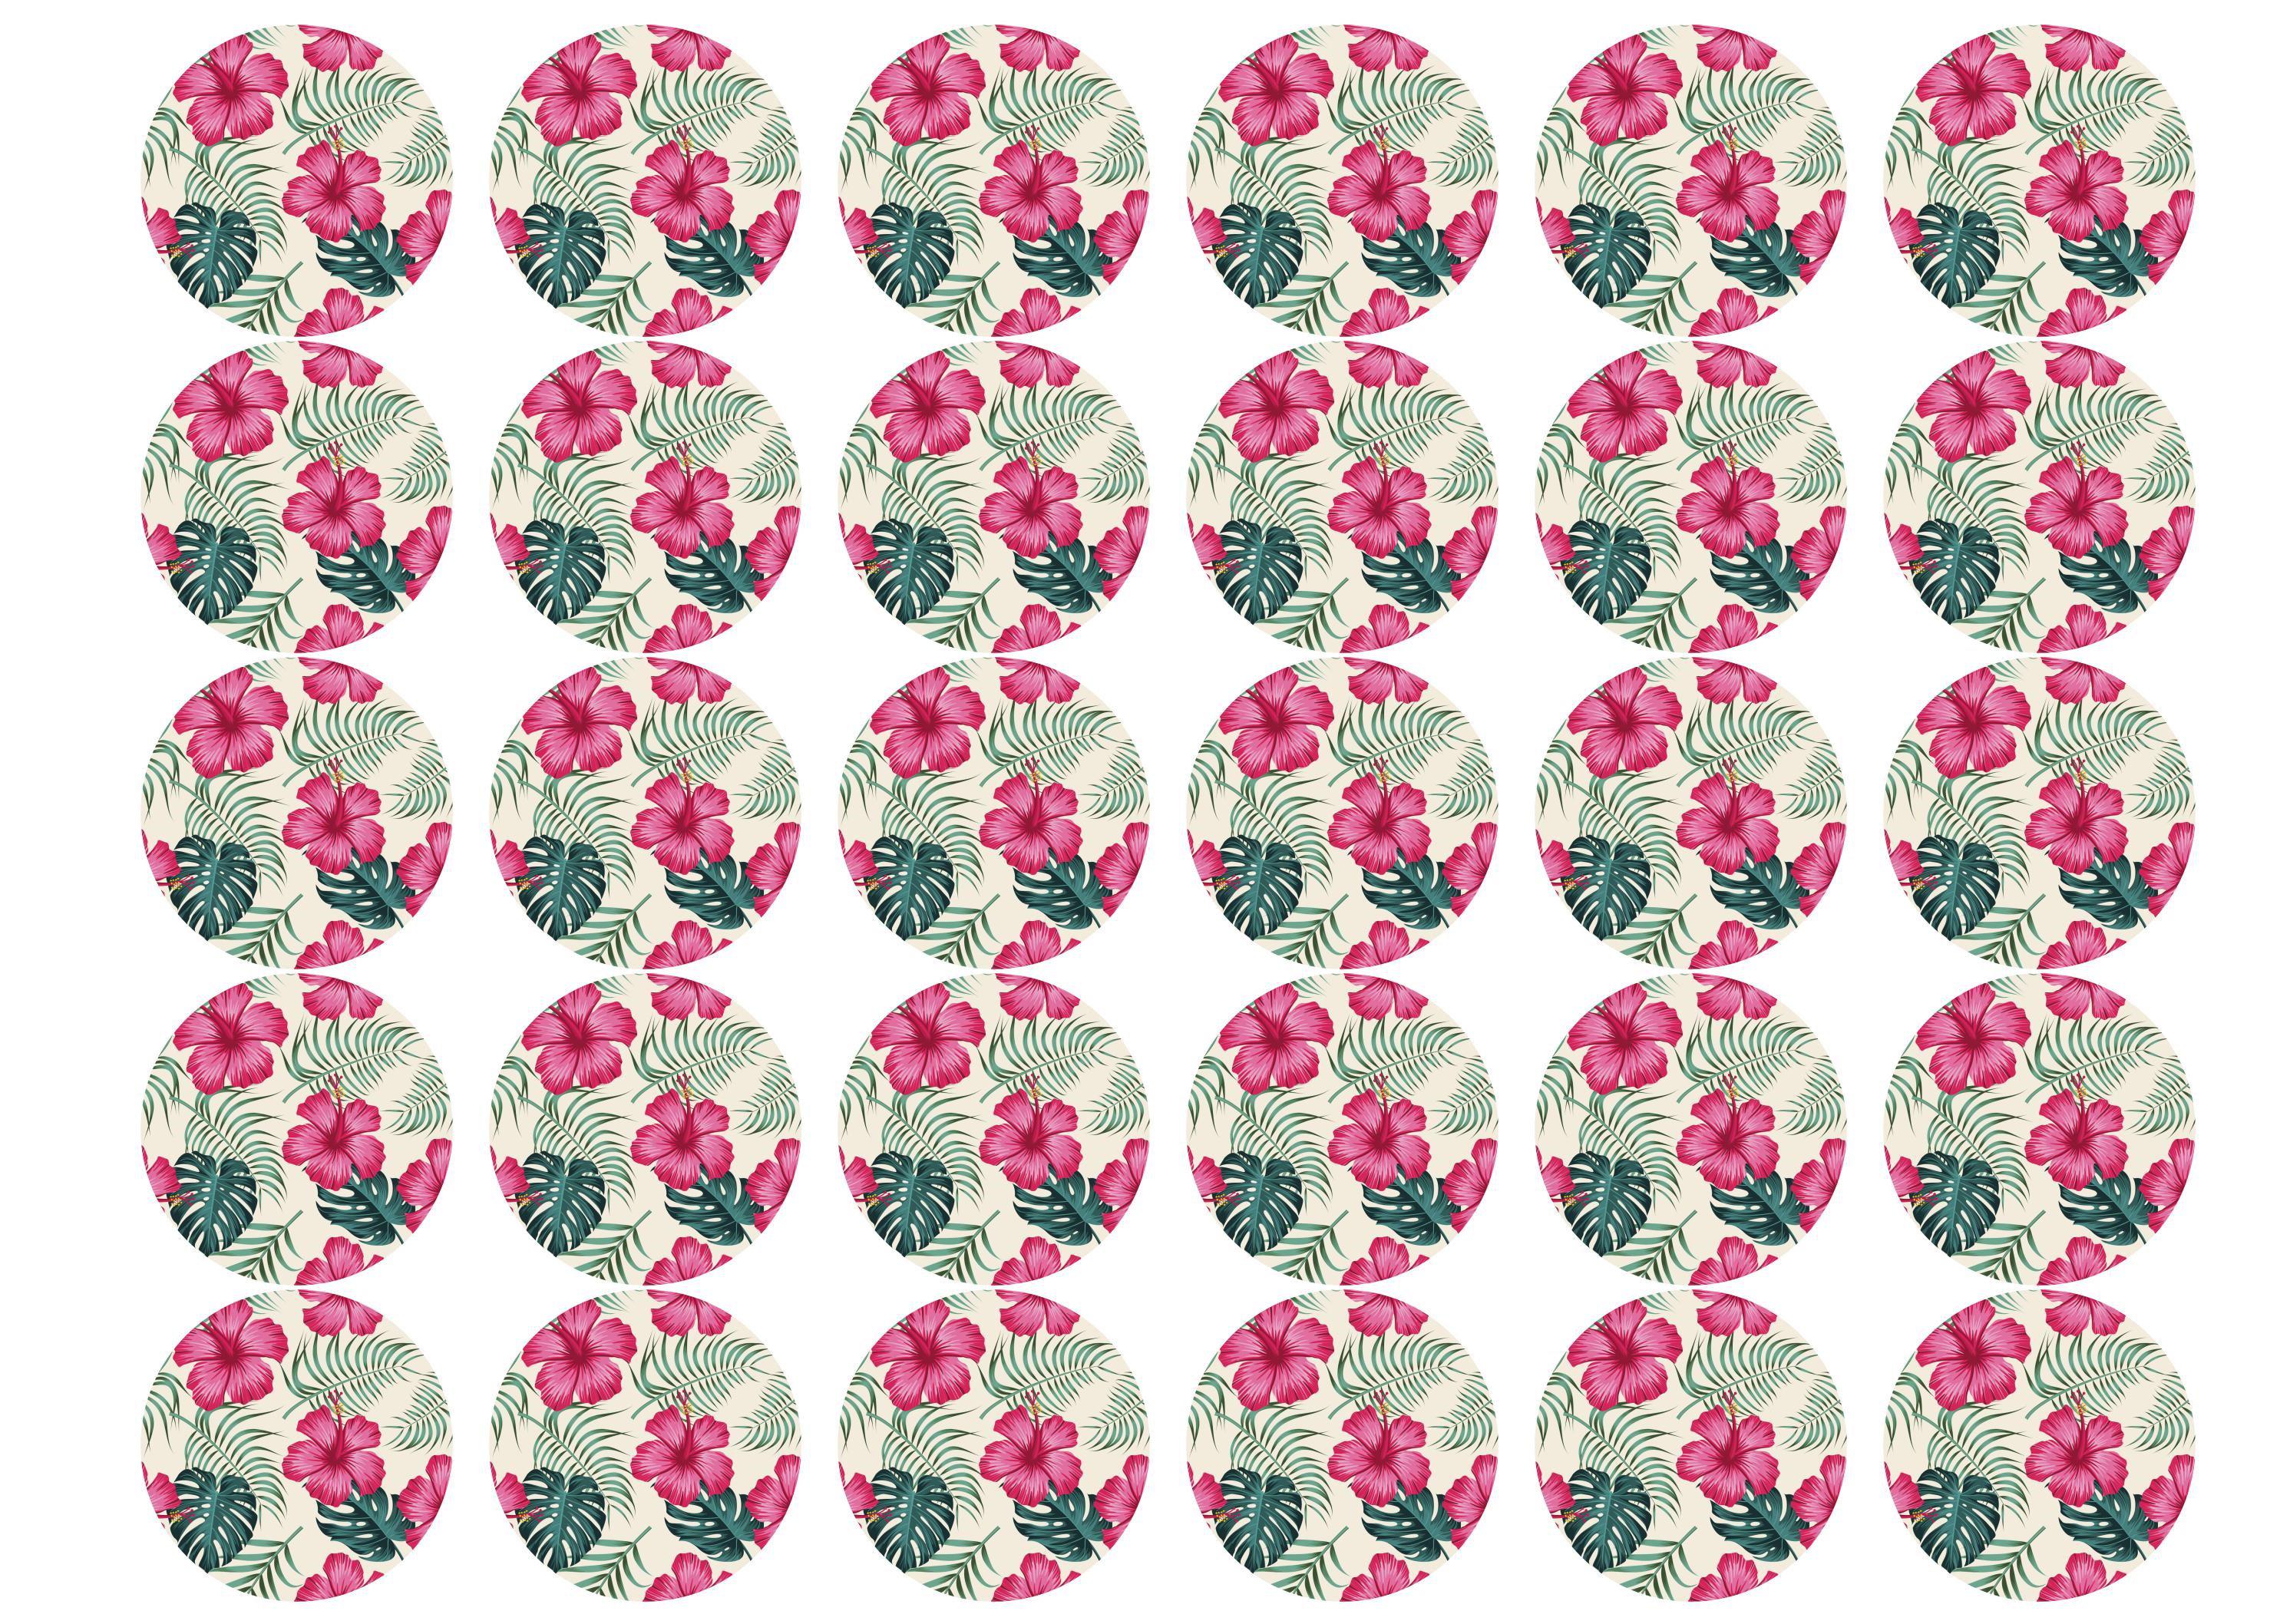 30 edible cupcake toppers with tropical hot pink hibiscus and green monstera leaves